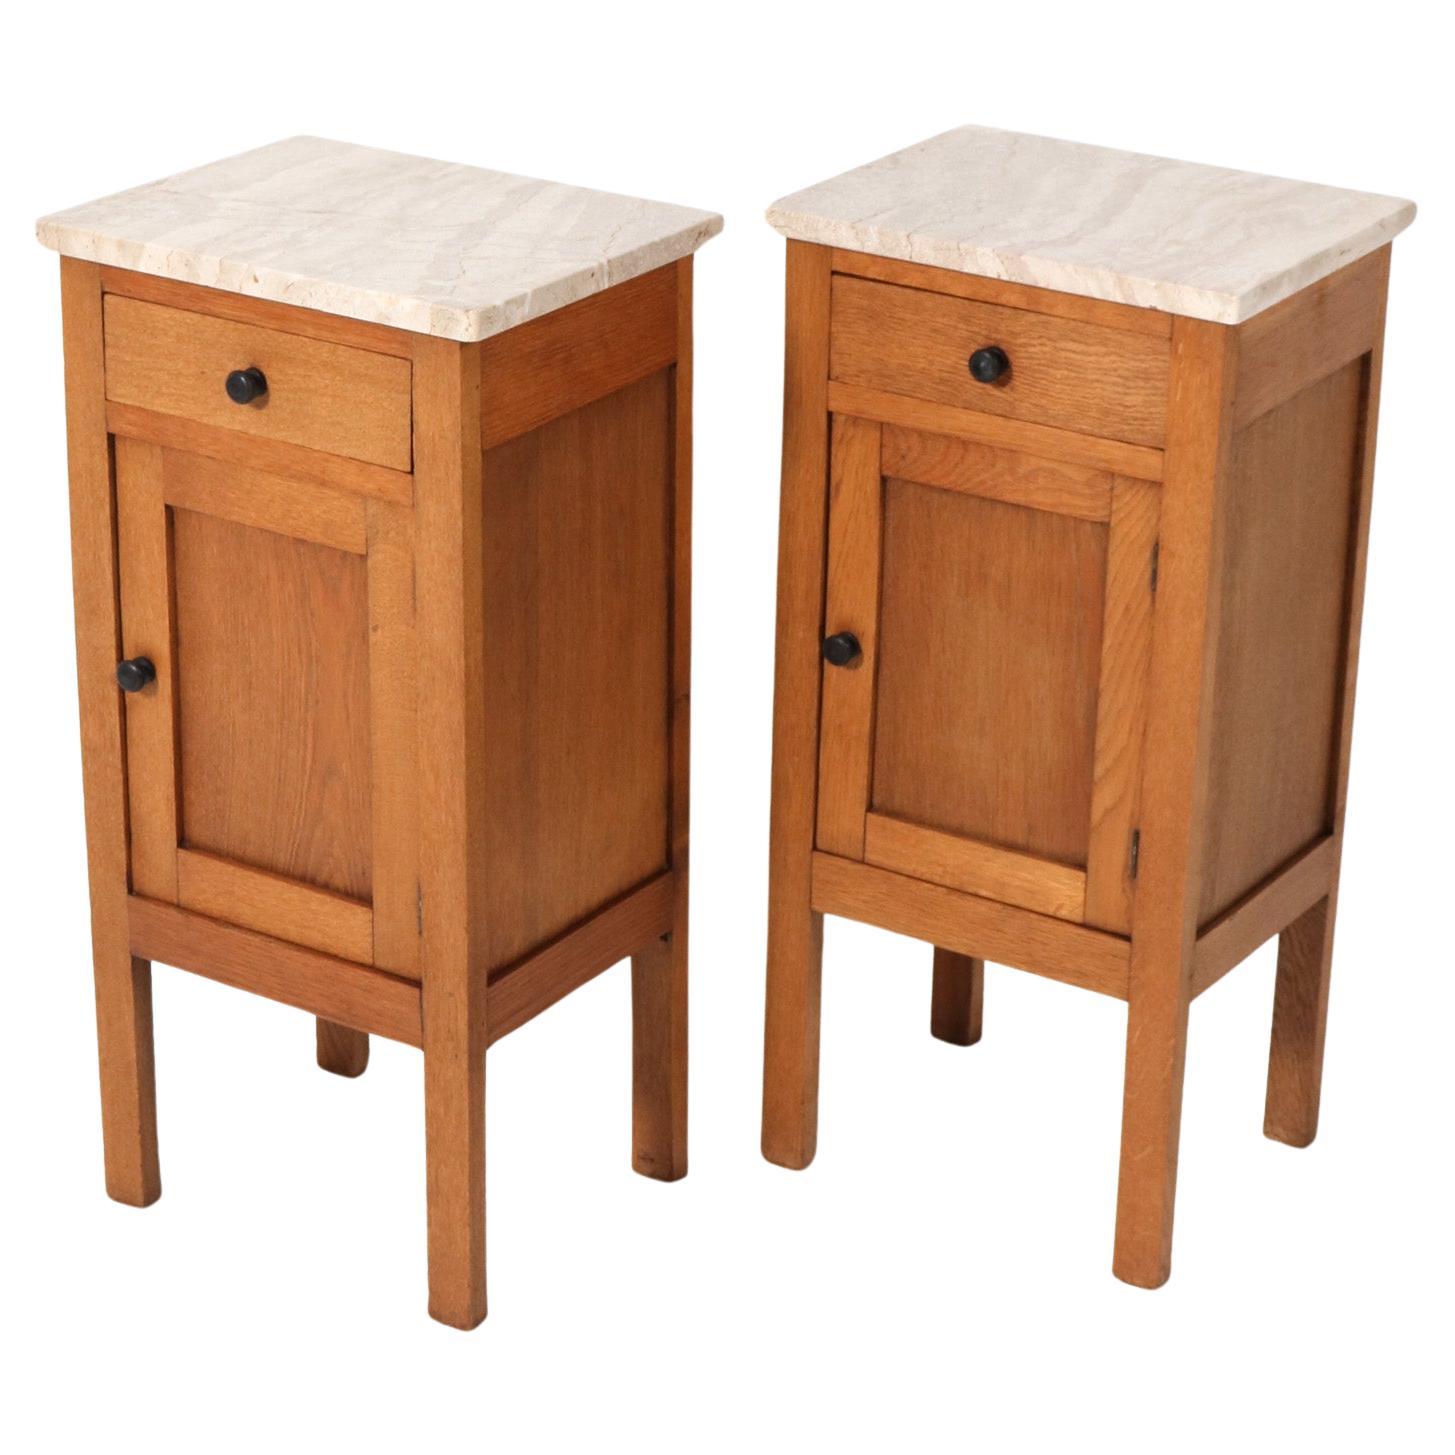 Two Arts & Crafts Art Nouveau Oak Nightstands or Bedside Tables, 1900s For Sale